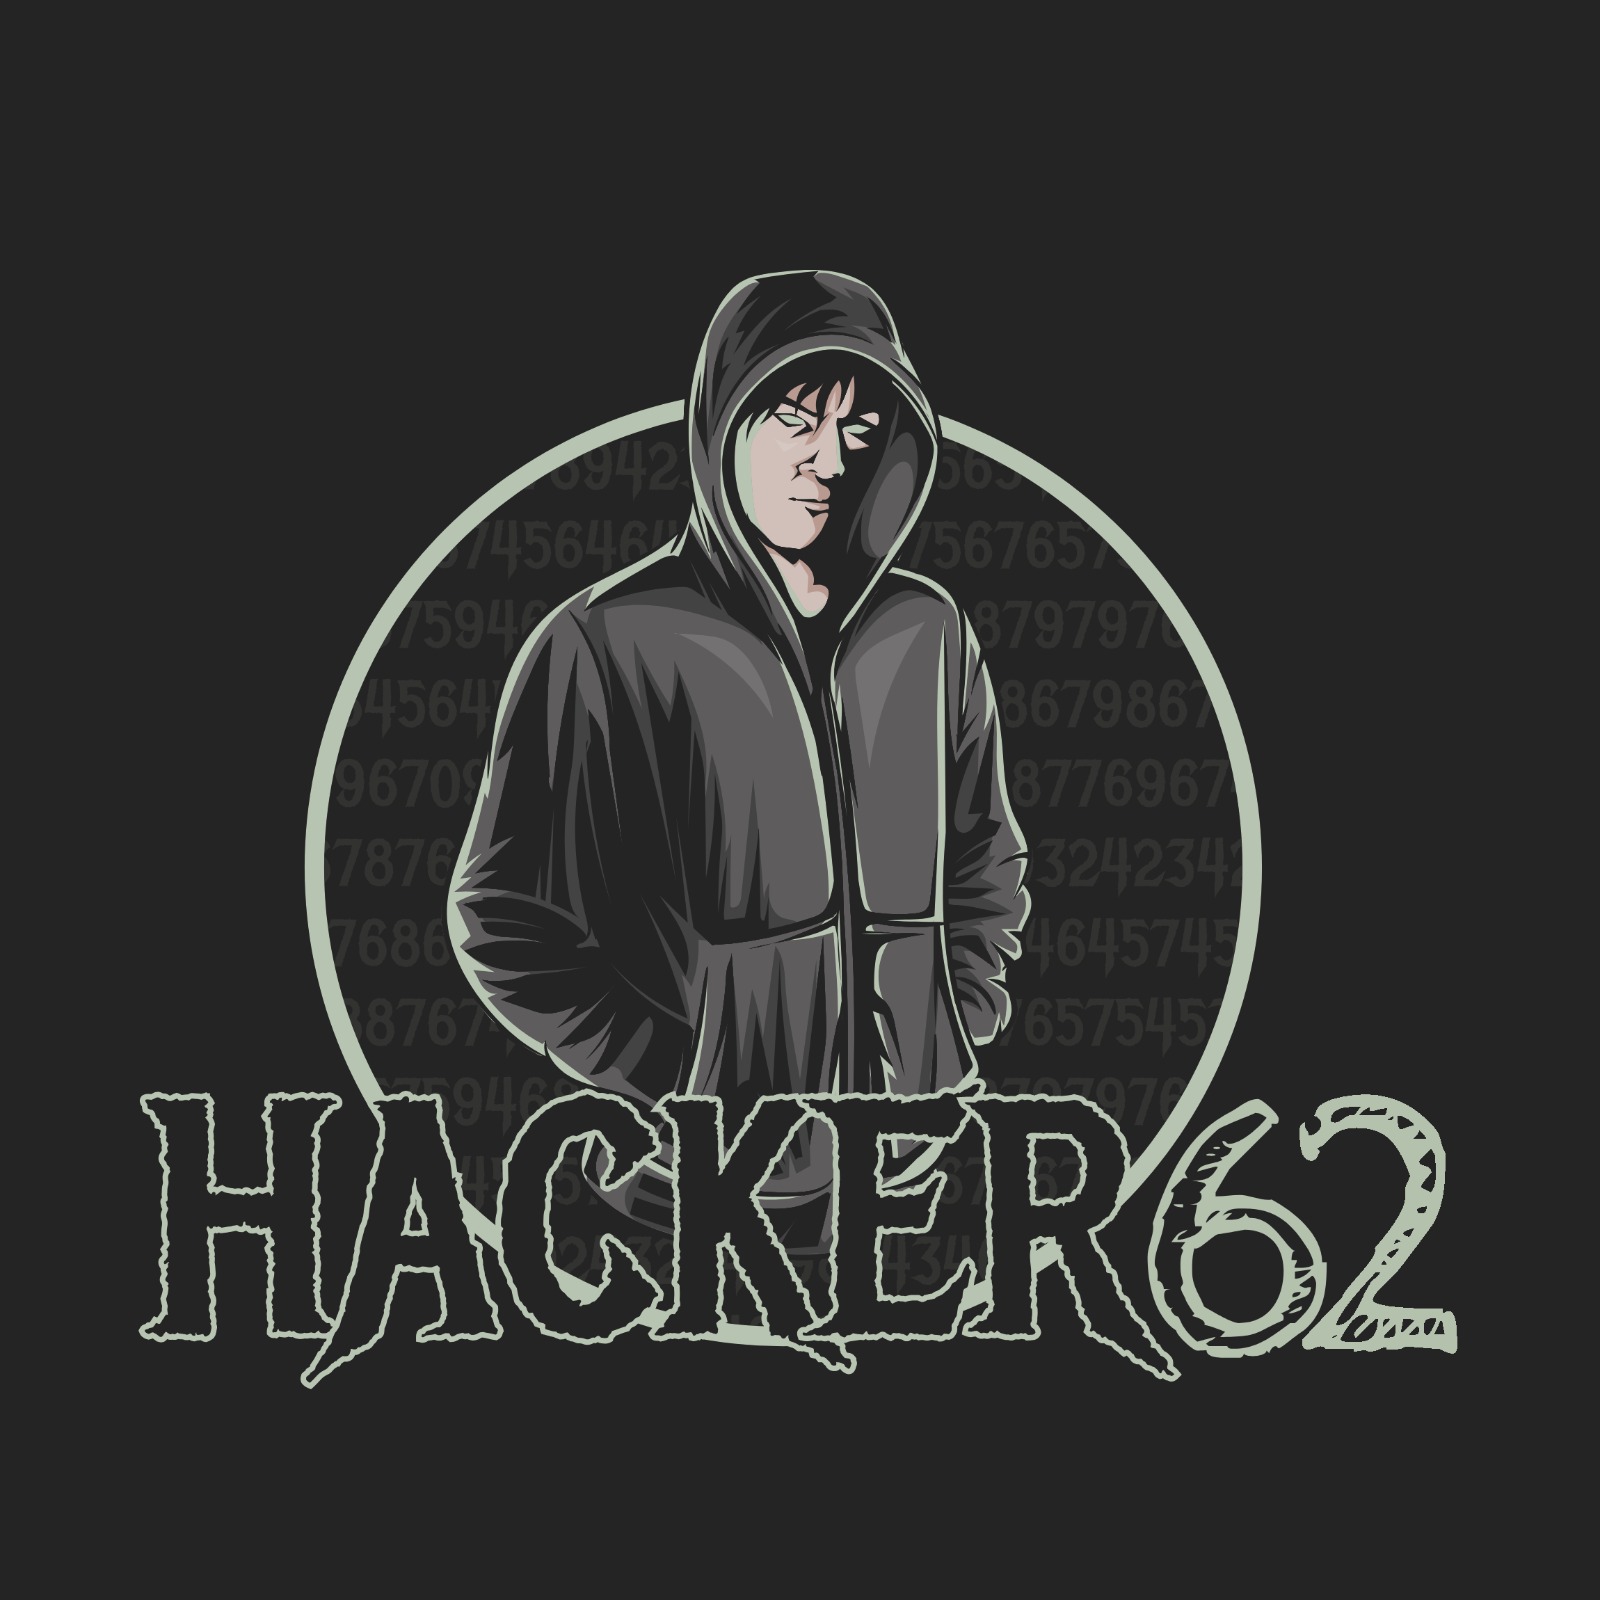 Hacker Slot 62: Indonesia’s Gold Standard for RTP Accuracy